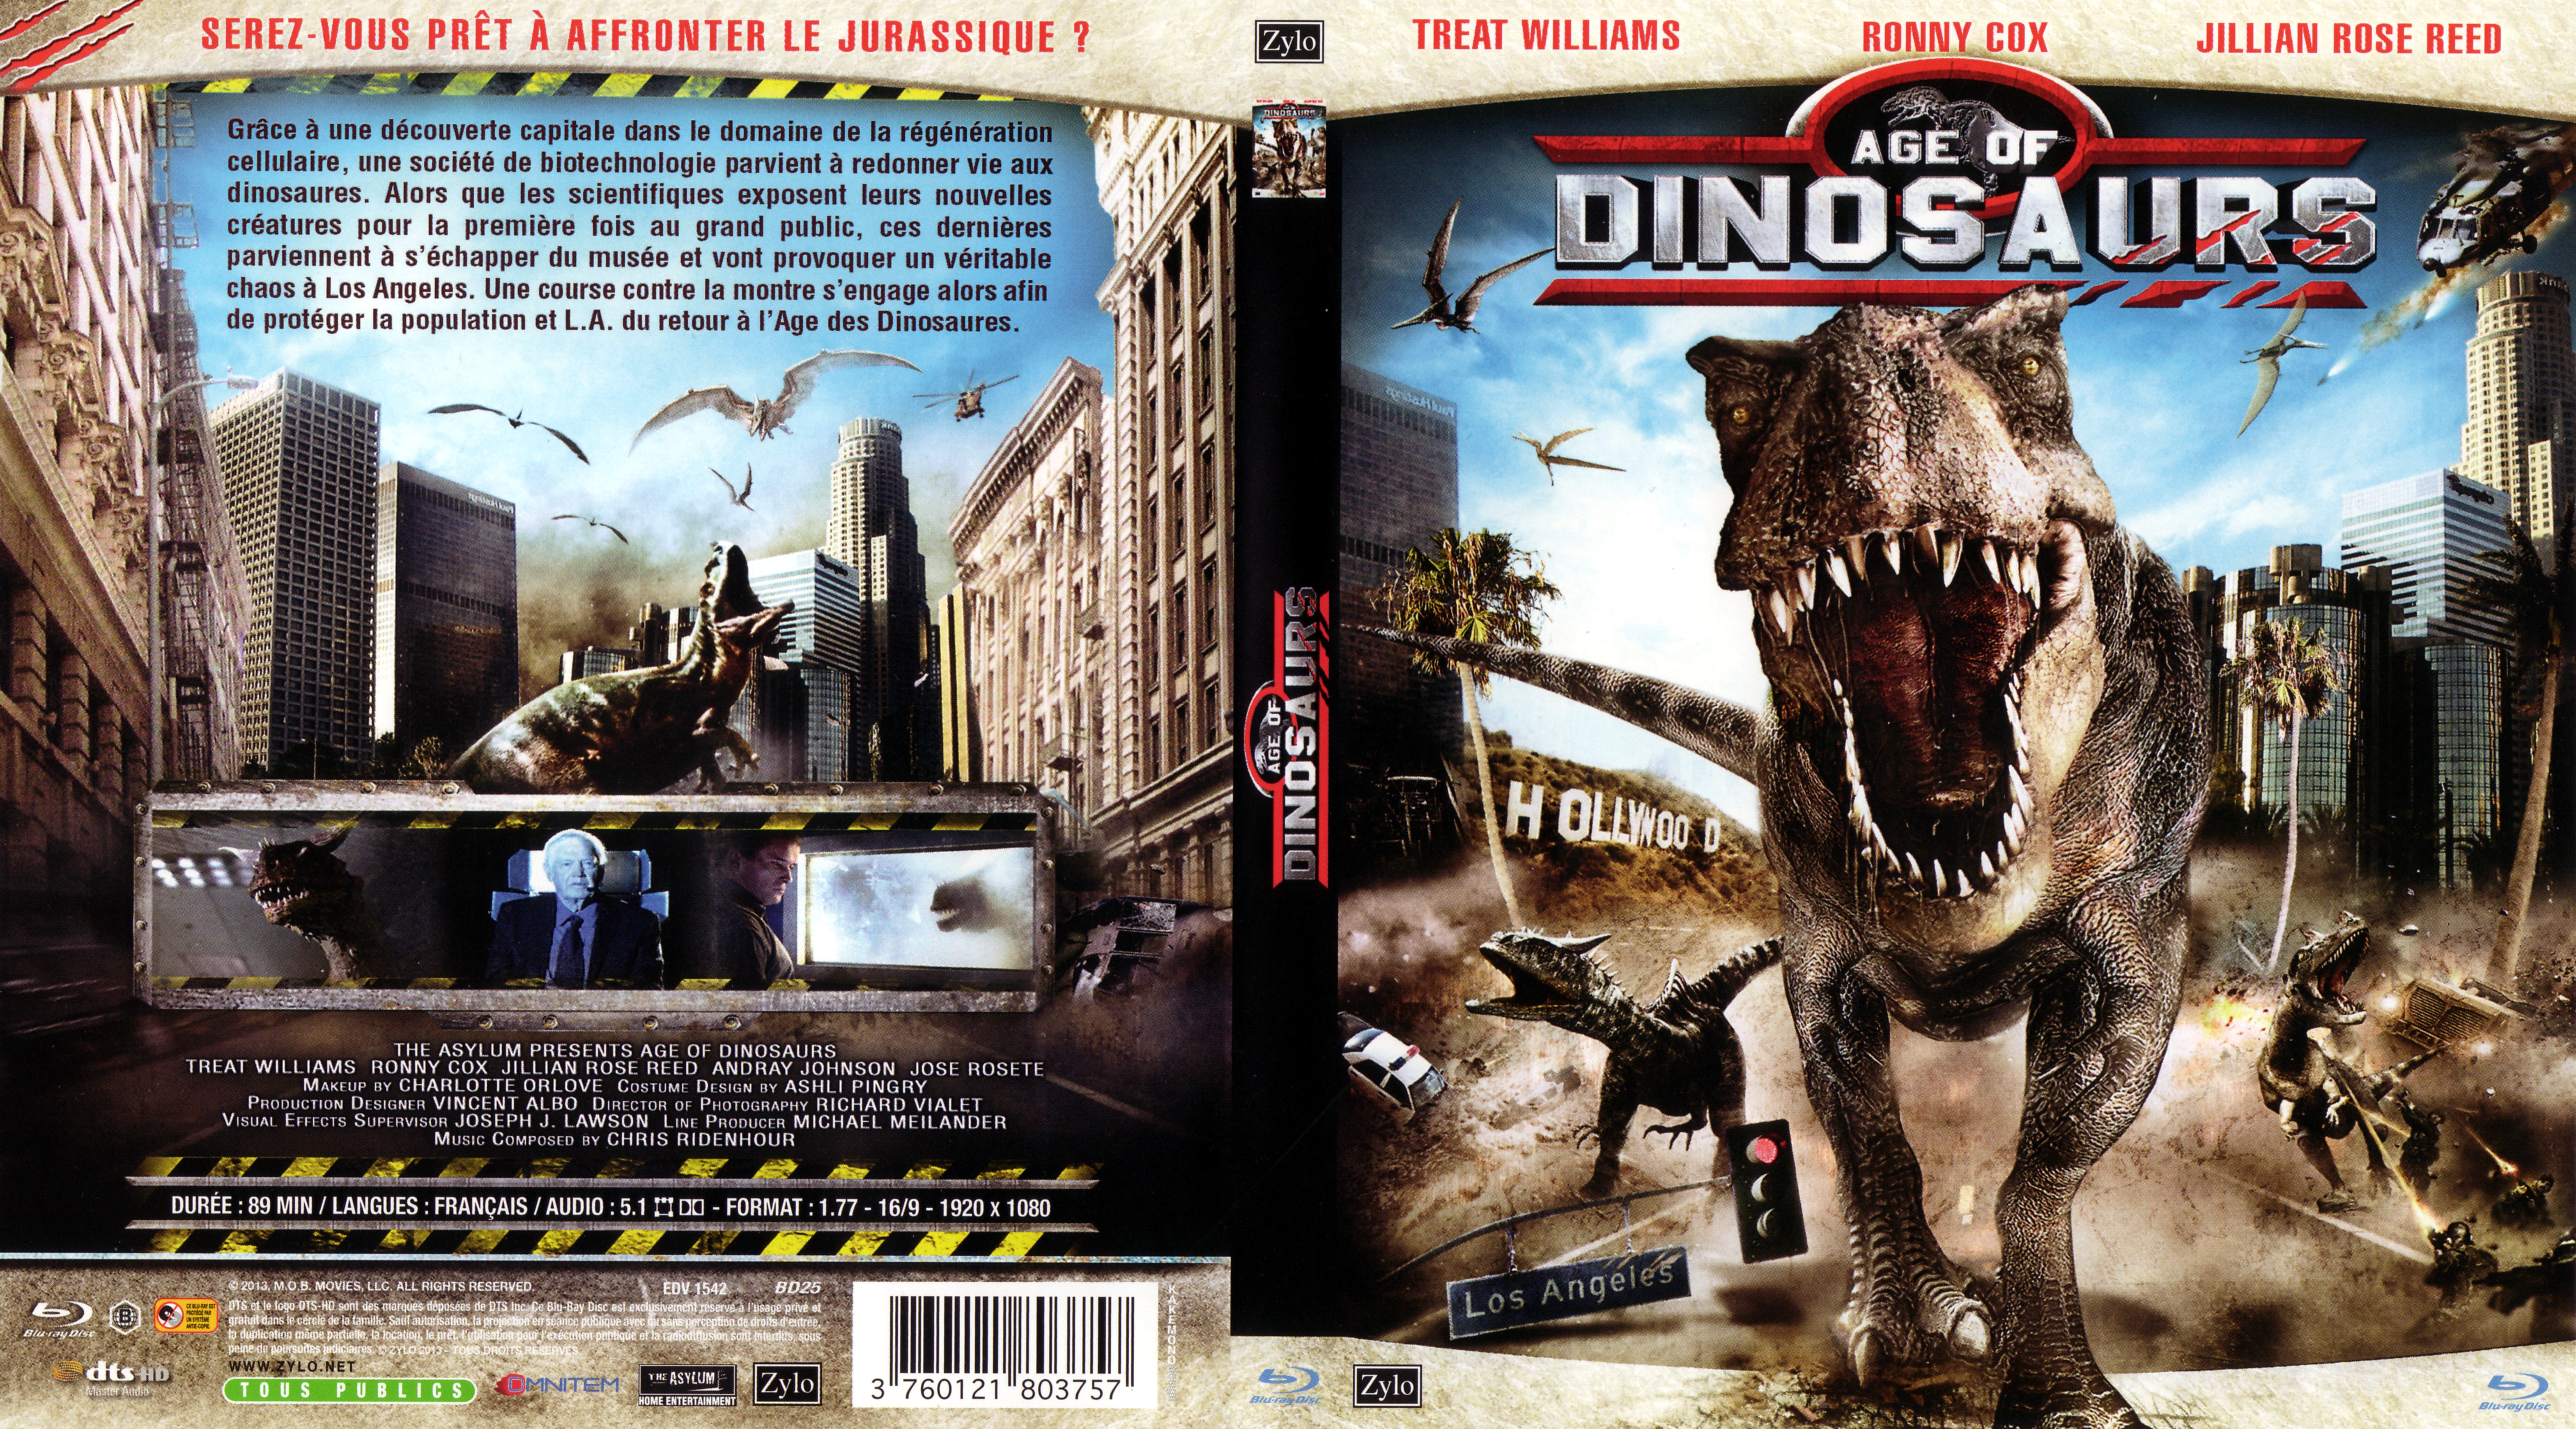 Jaquette DVD Age of dinosaurs (BLU-RAY)